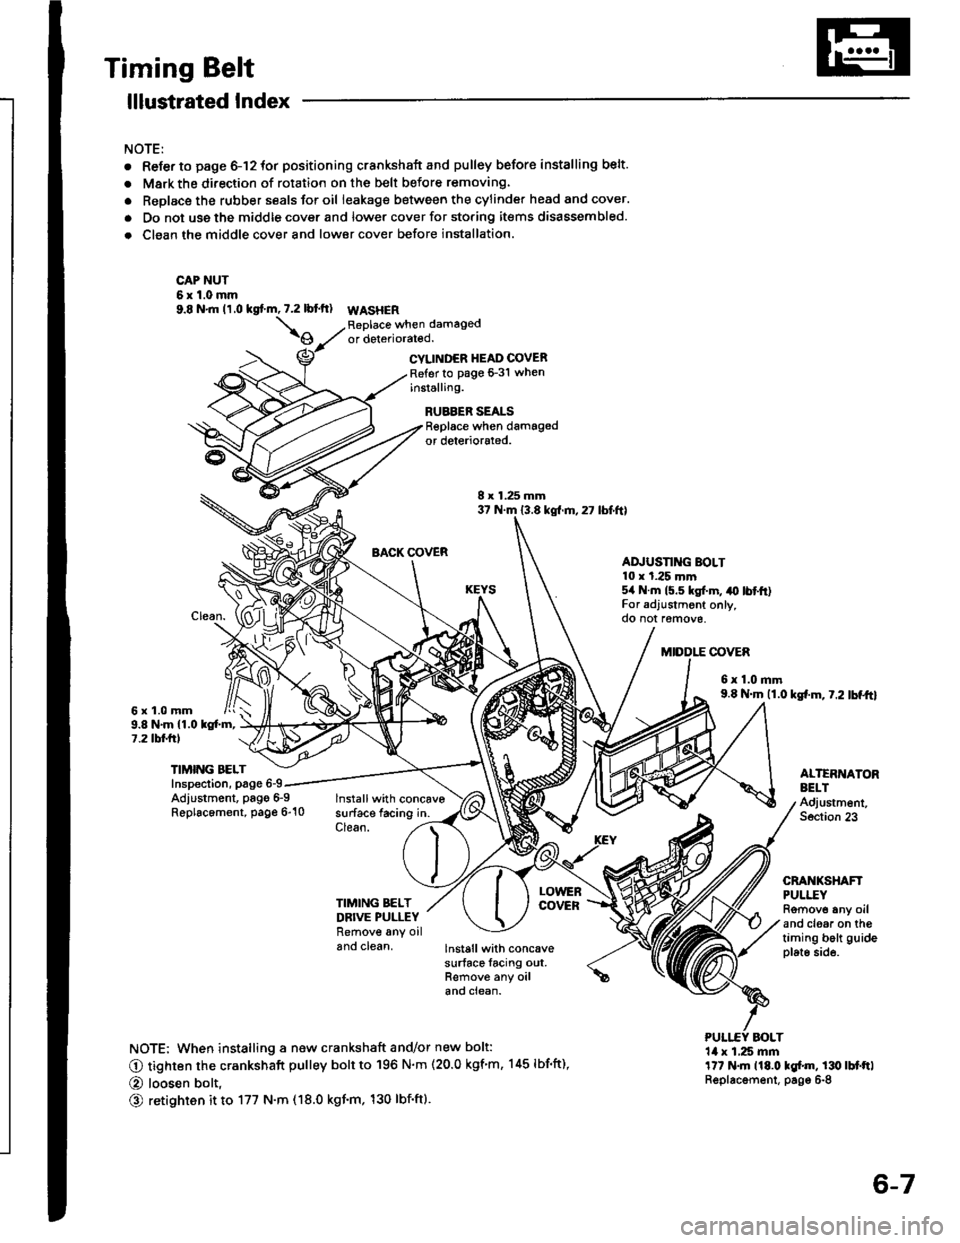 HONDA INTEGRA 1994 4.G Workshop Manual Timing Belt
lllustrated Index
NOTE:
. Refer to page 6-12 for positioning crankshaft and pulley before installing belt.
. Mark the direction of rotation on the belt before removing.
. Replace the rubbe